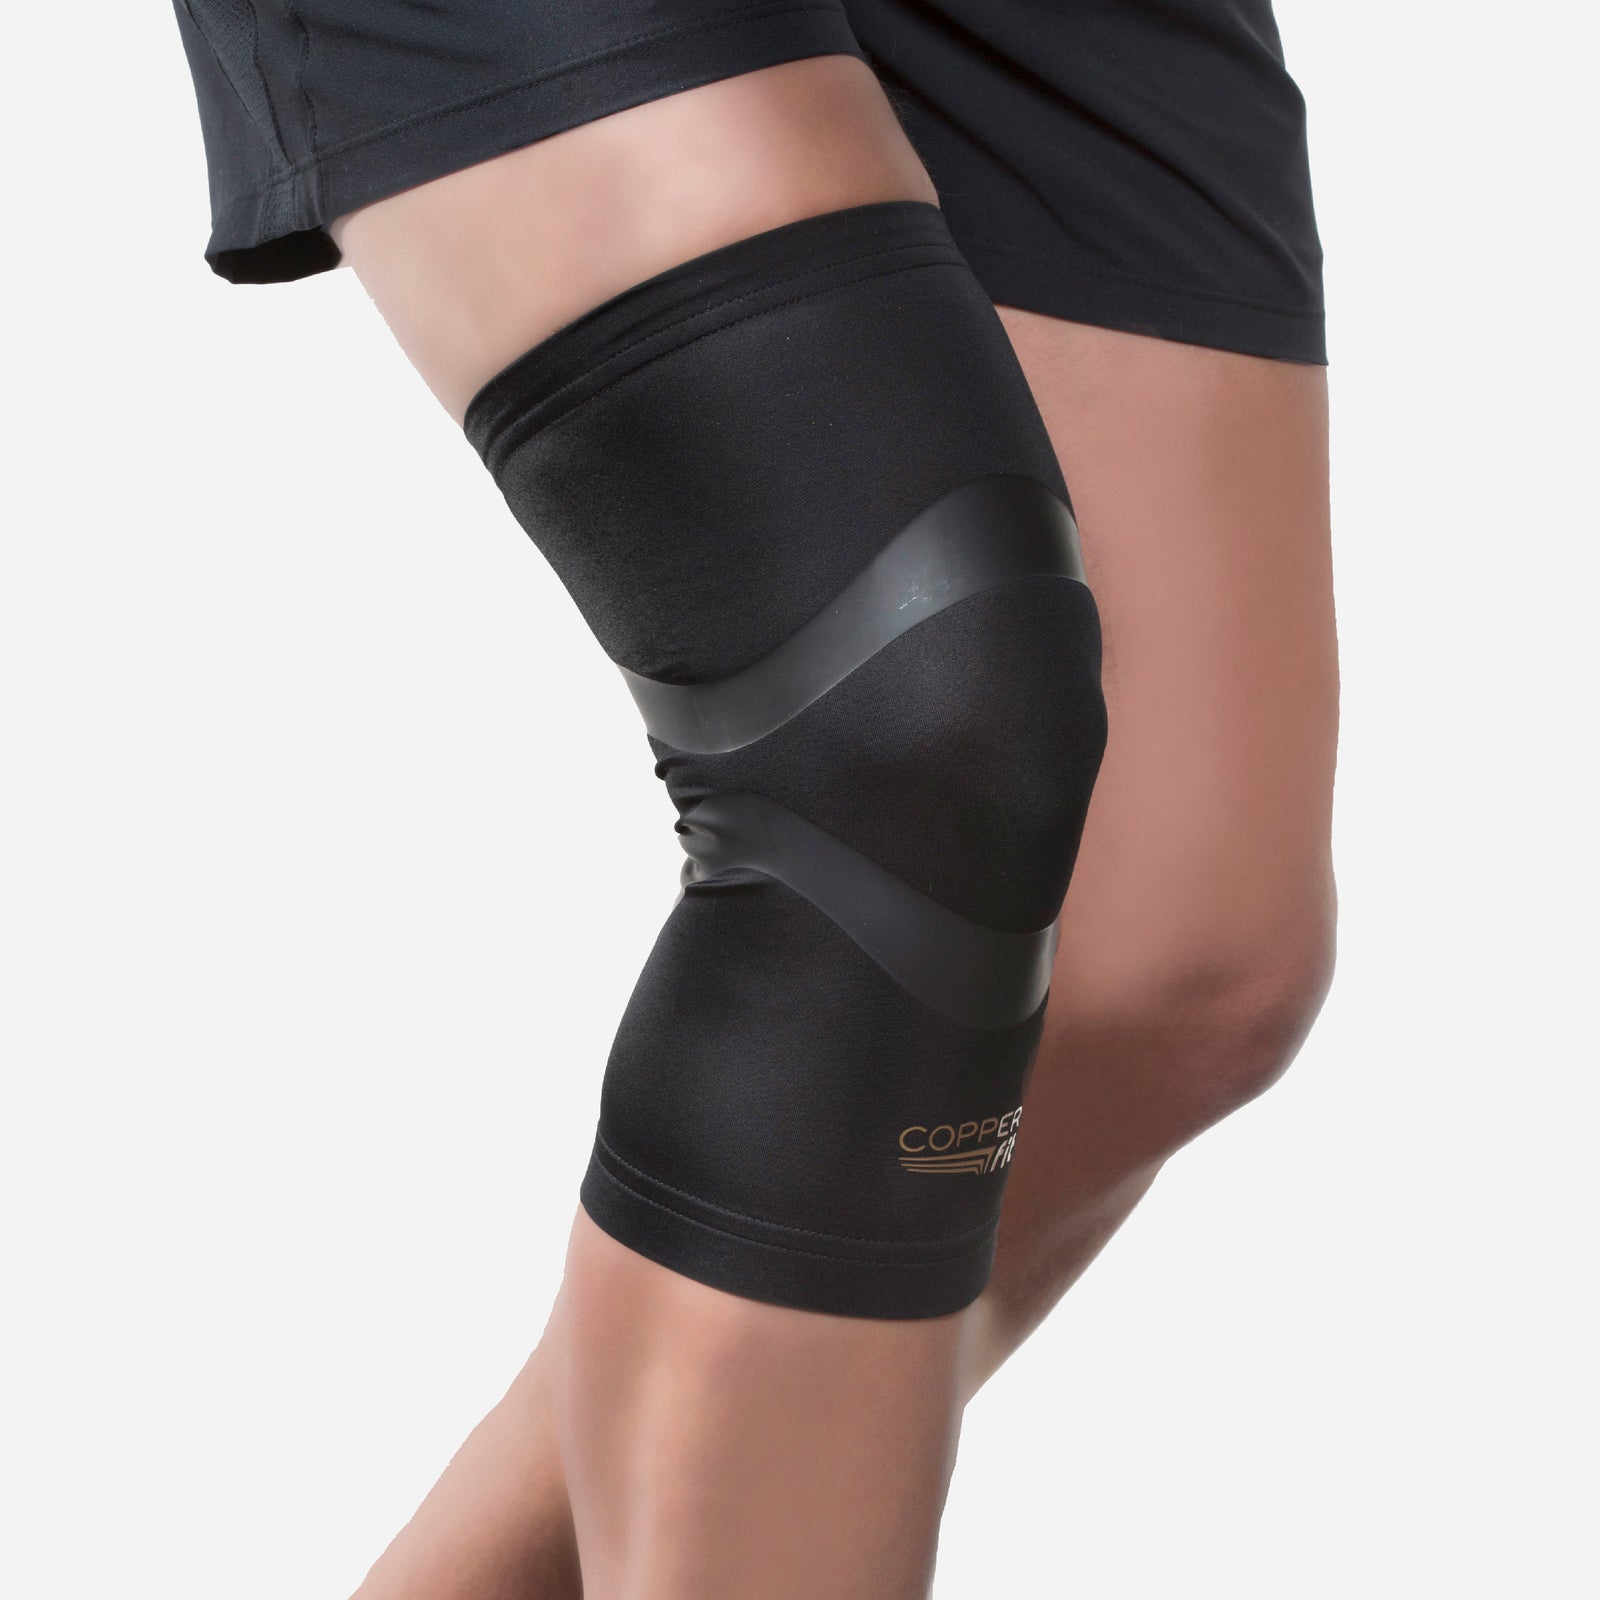 closal Copper fit calf sleeve Knee, Calf & Thigh Support Knee Support - Buy  closal Copper fit calf sleeve Knee, Calf & Thigh Support Knee Support  Online at Best Prices in India 